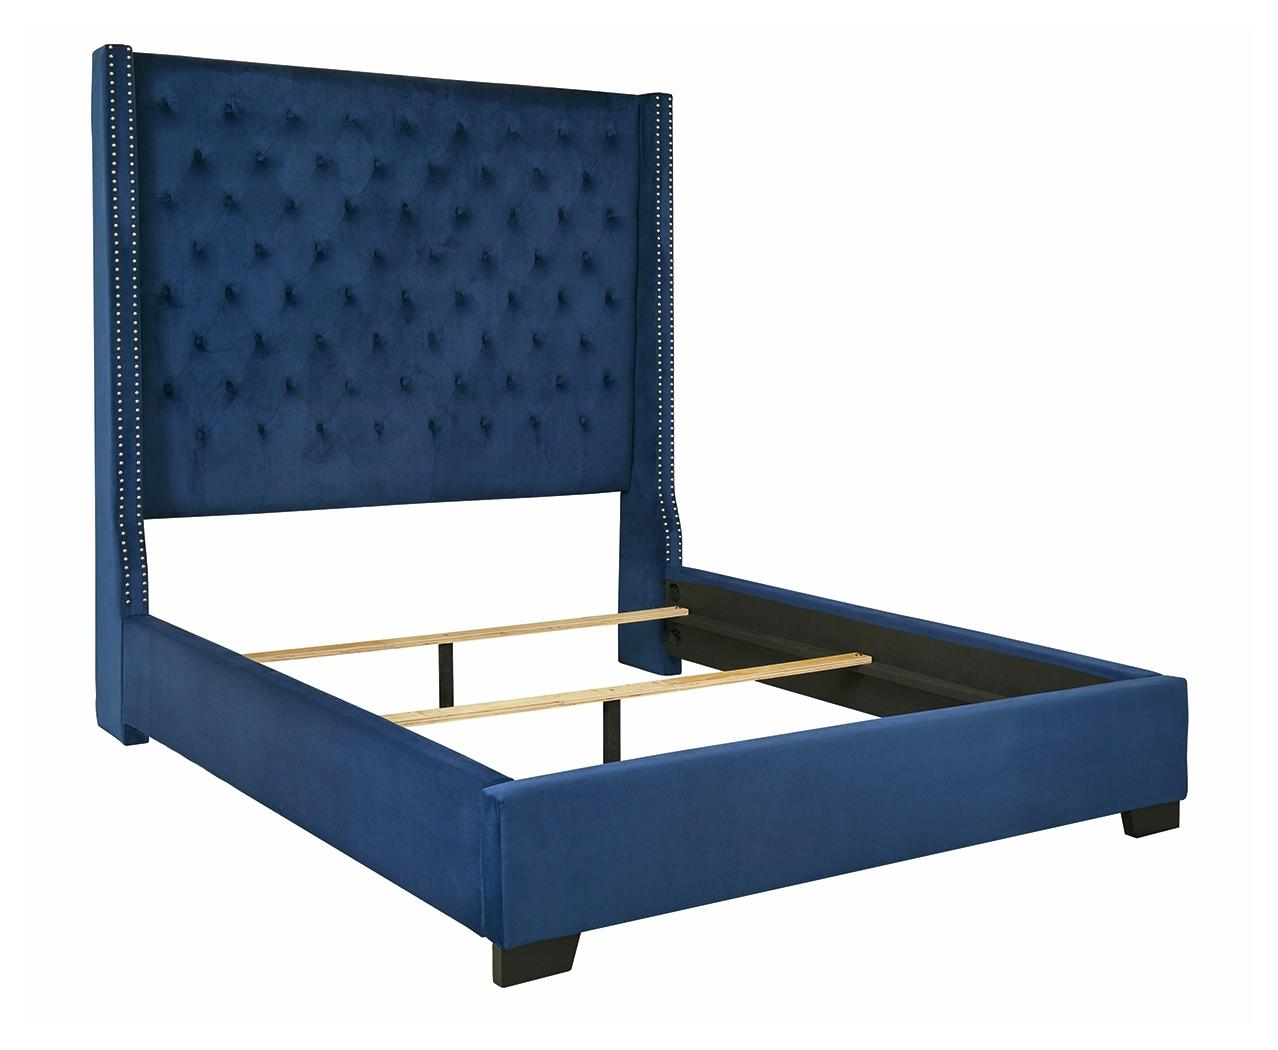 ASHLEY FURNITURE B650B23 Coralayne Queen Upholstered Bed